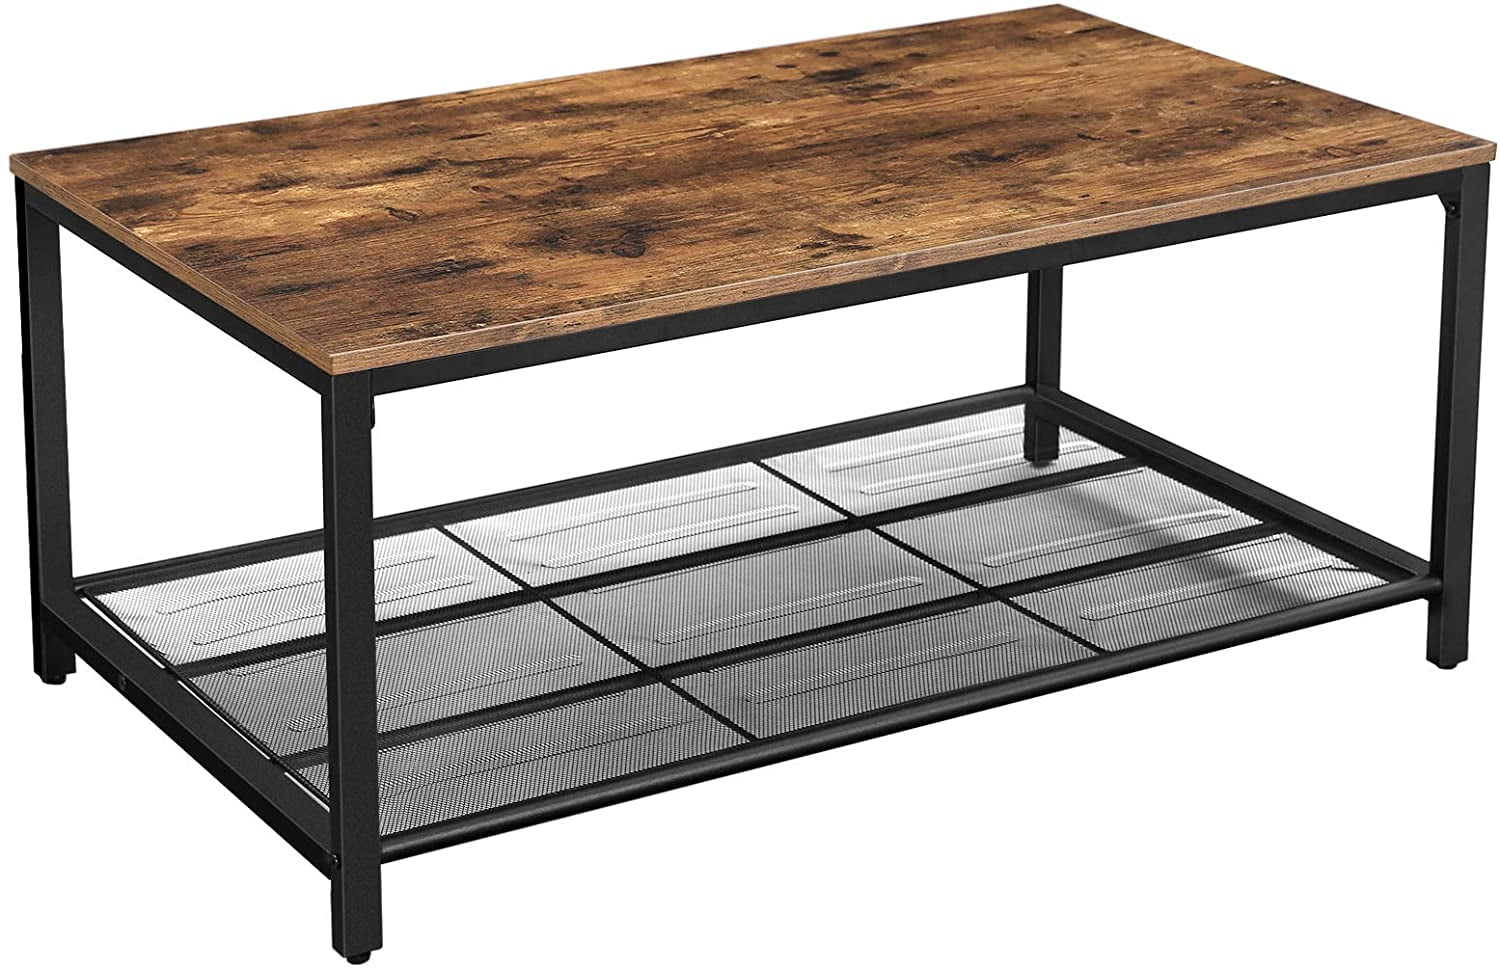 39.4 x 19.7 x 17.7 Inches VASAGLE Coffee Table Long Legs for Living Room Cocktail Table with Drawer and Open Storage Compartment Rustic Brown ULCT028X01 